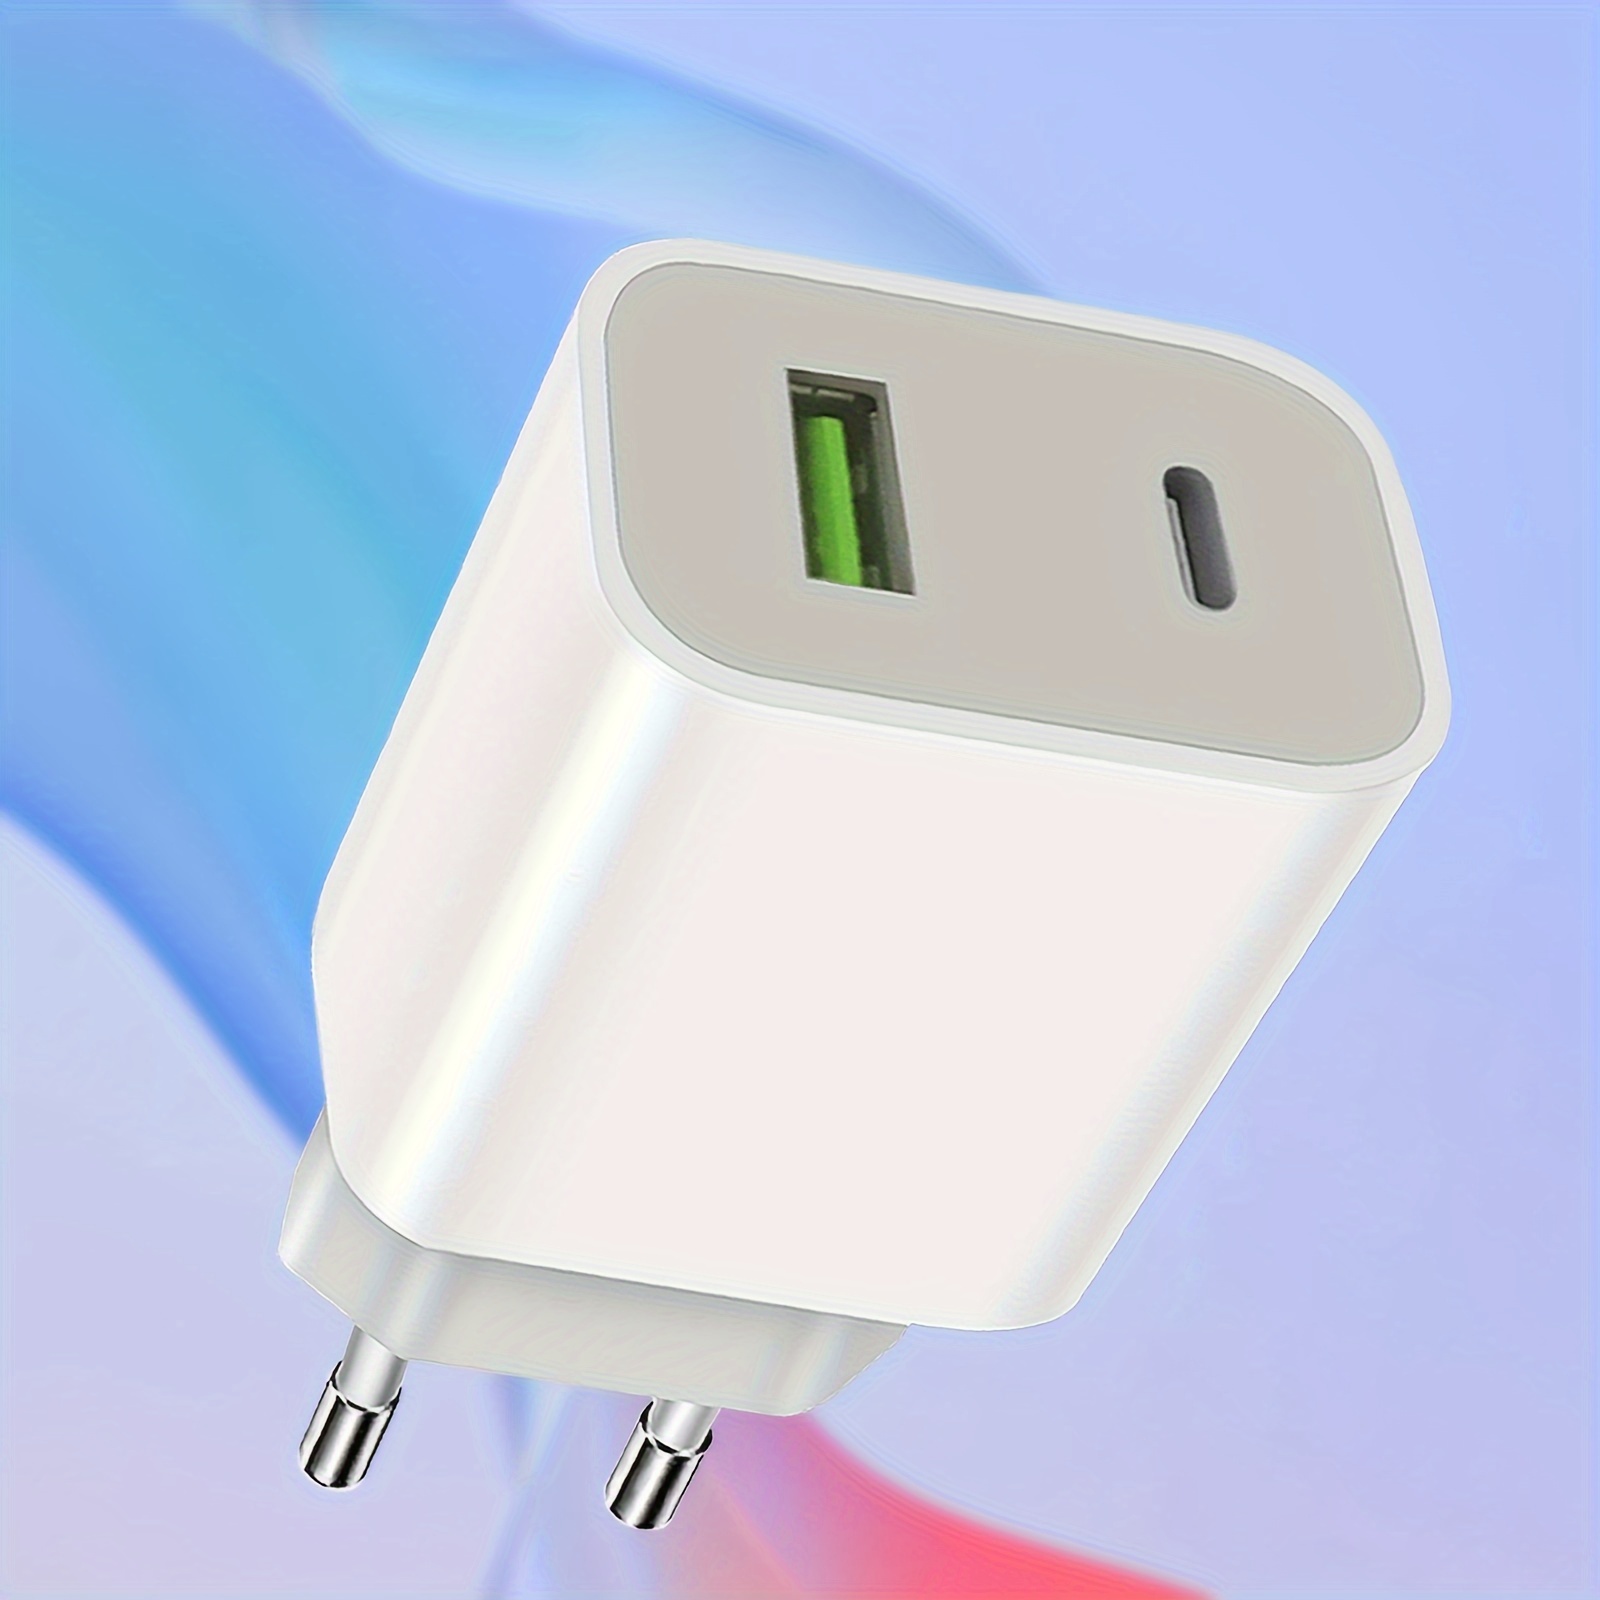 

Usb C Charger Block Power Adapter Wall Charger, Double Fast Plug Charging Brick For 14/14 Pro/13/12/11/xs, For Samsung Galaxy - White